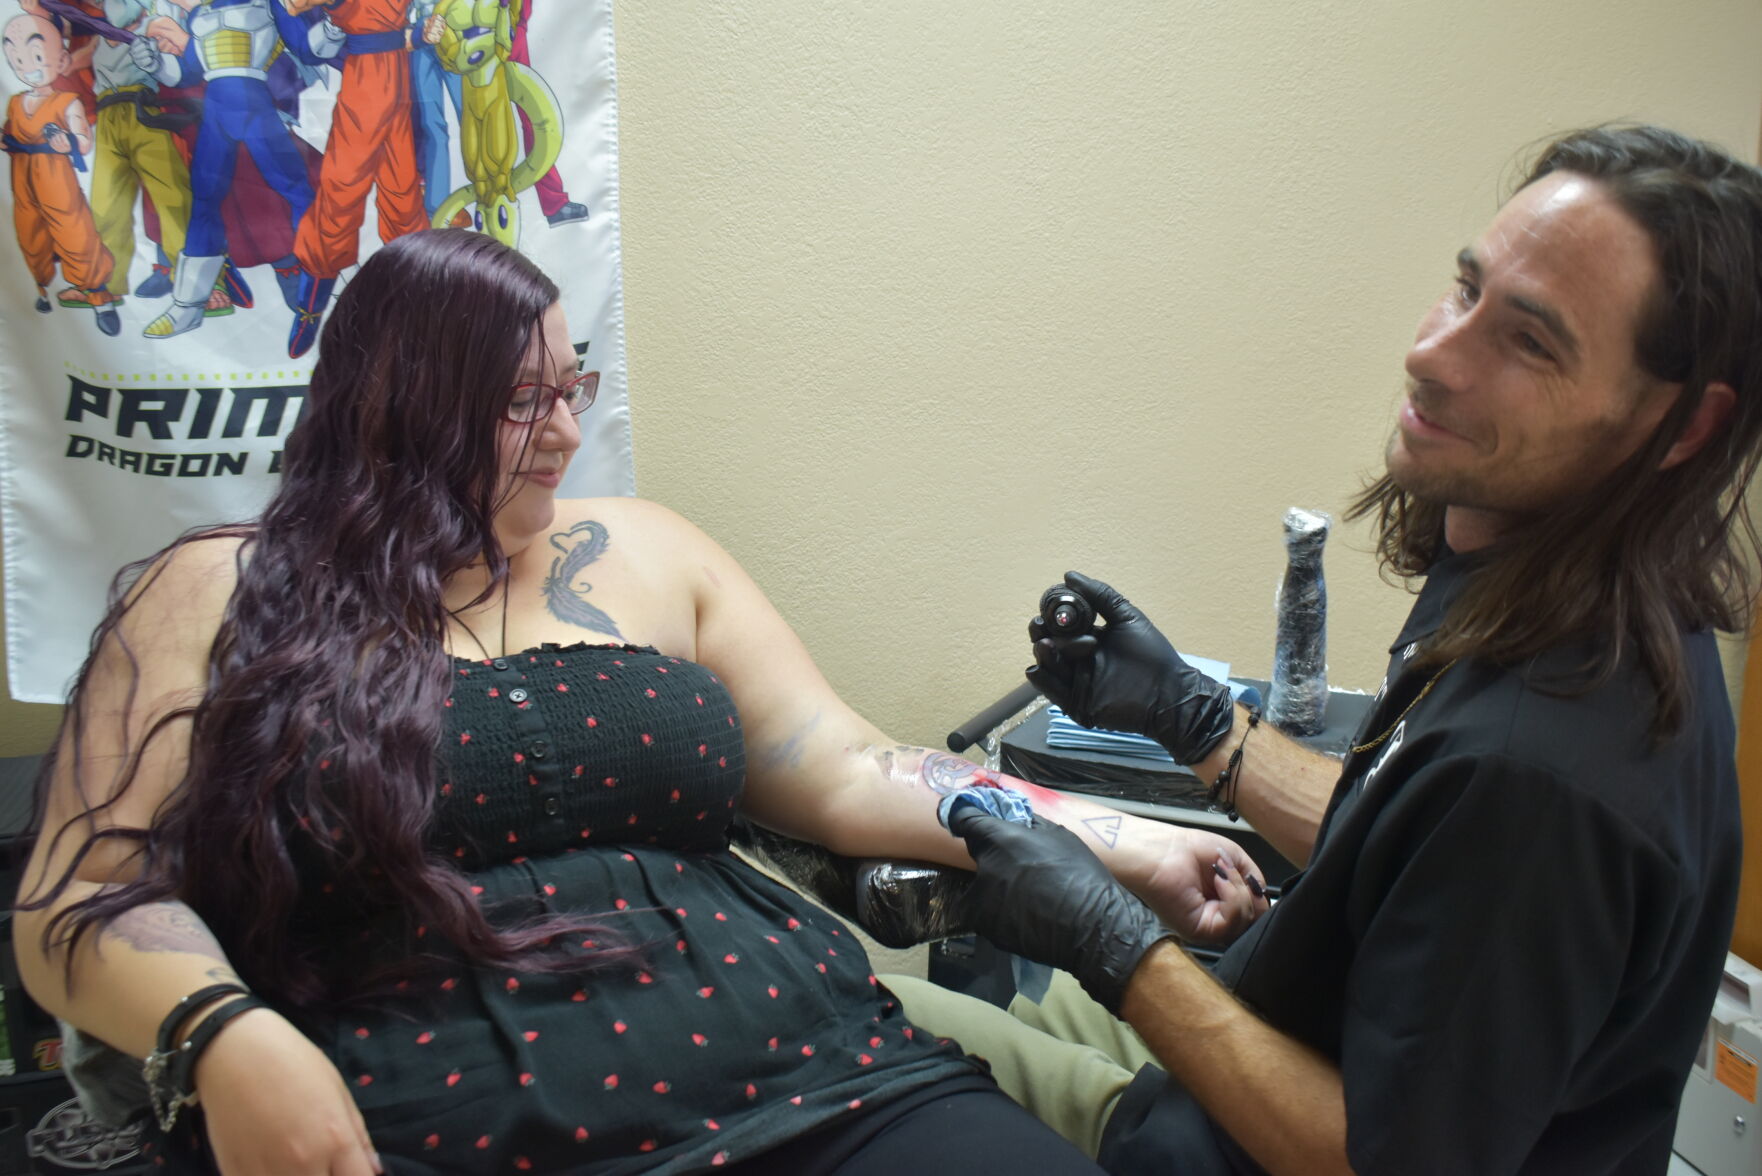 Power of ink: Wider acceptance, better equipment fuel tattoo industry